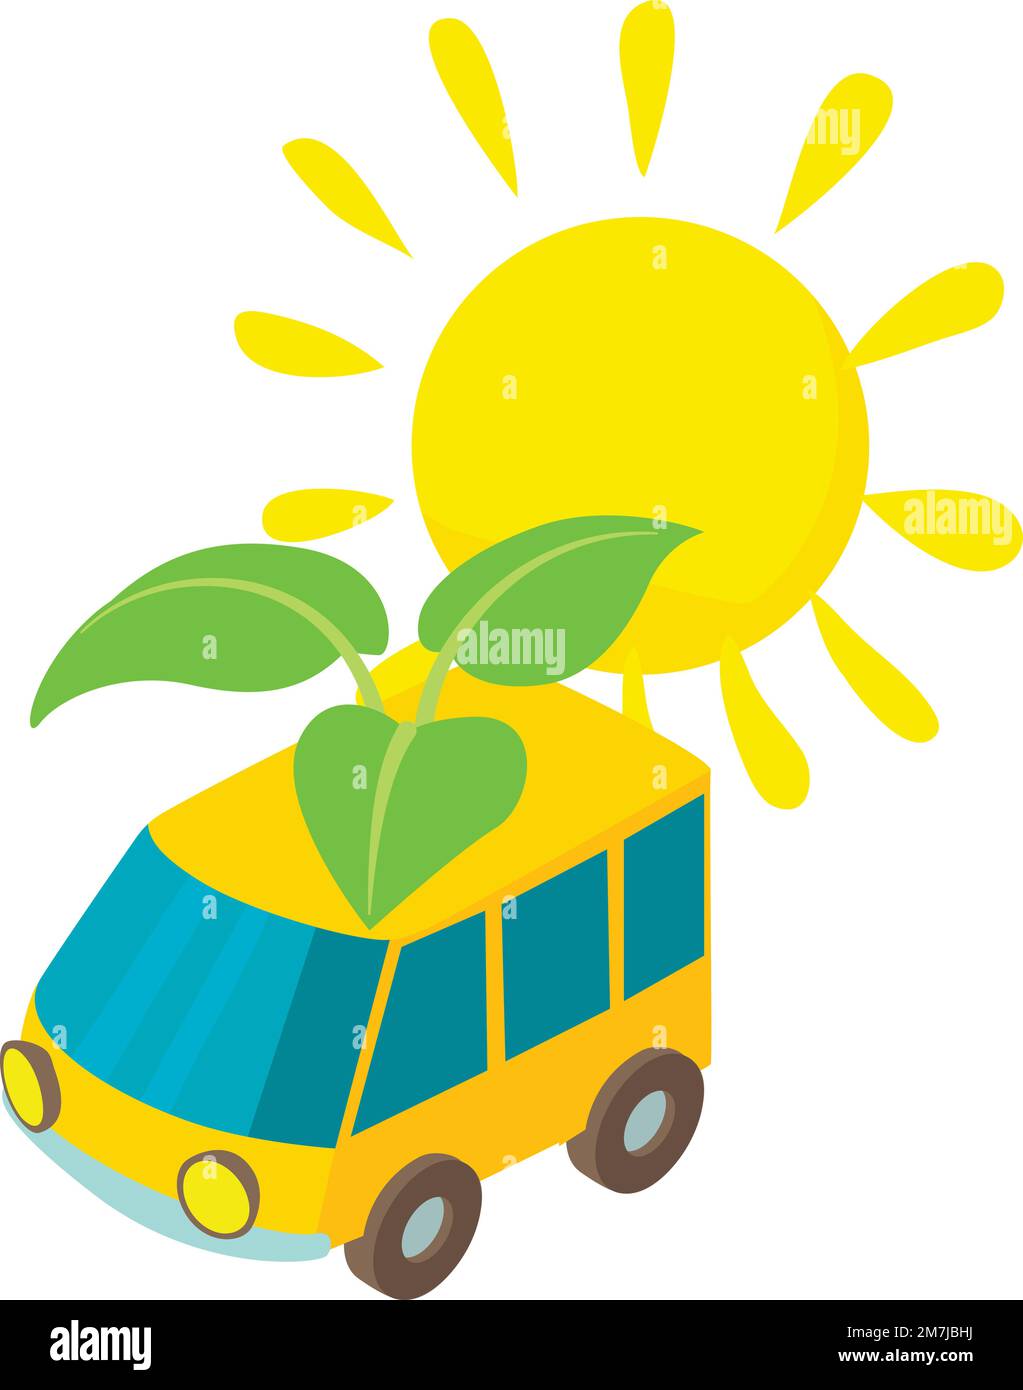 Eco transport icon isometric vector. Yellow car with green branch under sun icon. Alternative fuel, environmental protection Stock Vector